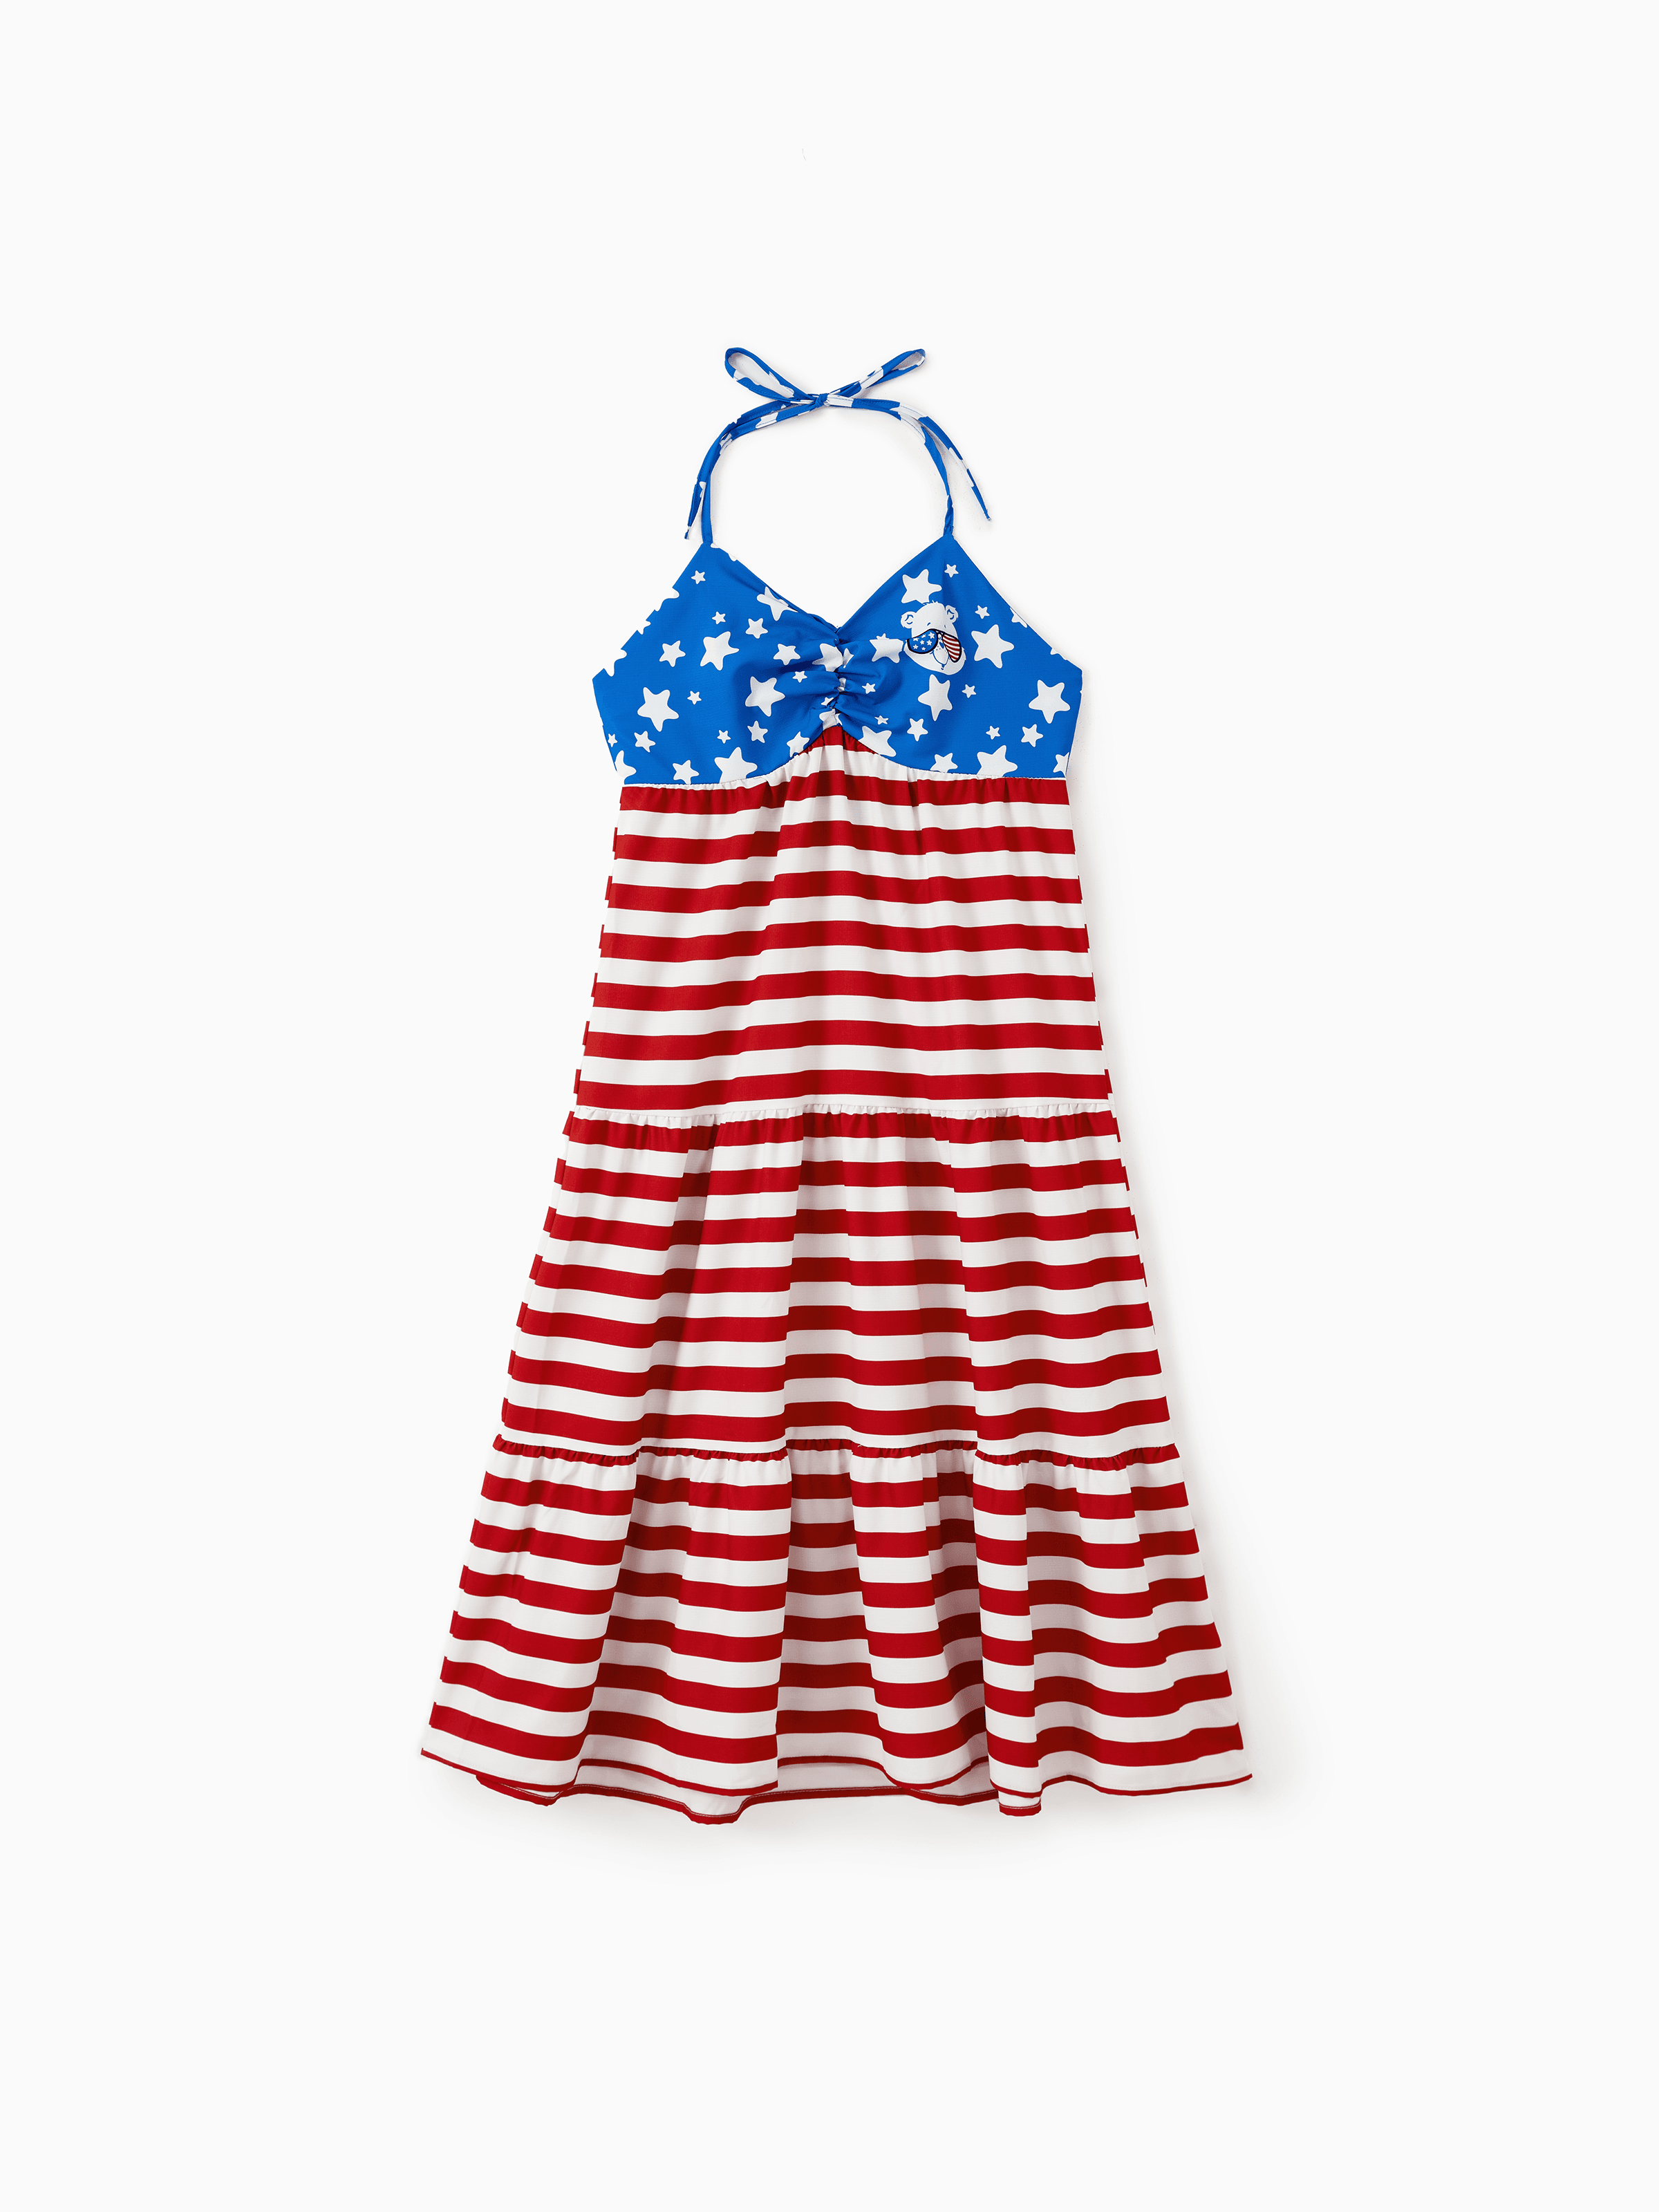 

Care Bears Family Matching Independence Day Character Striped Print Tee/Sleeveless Dress